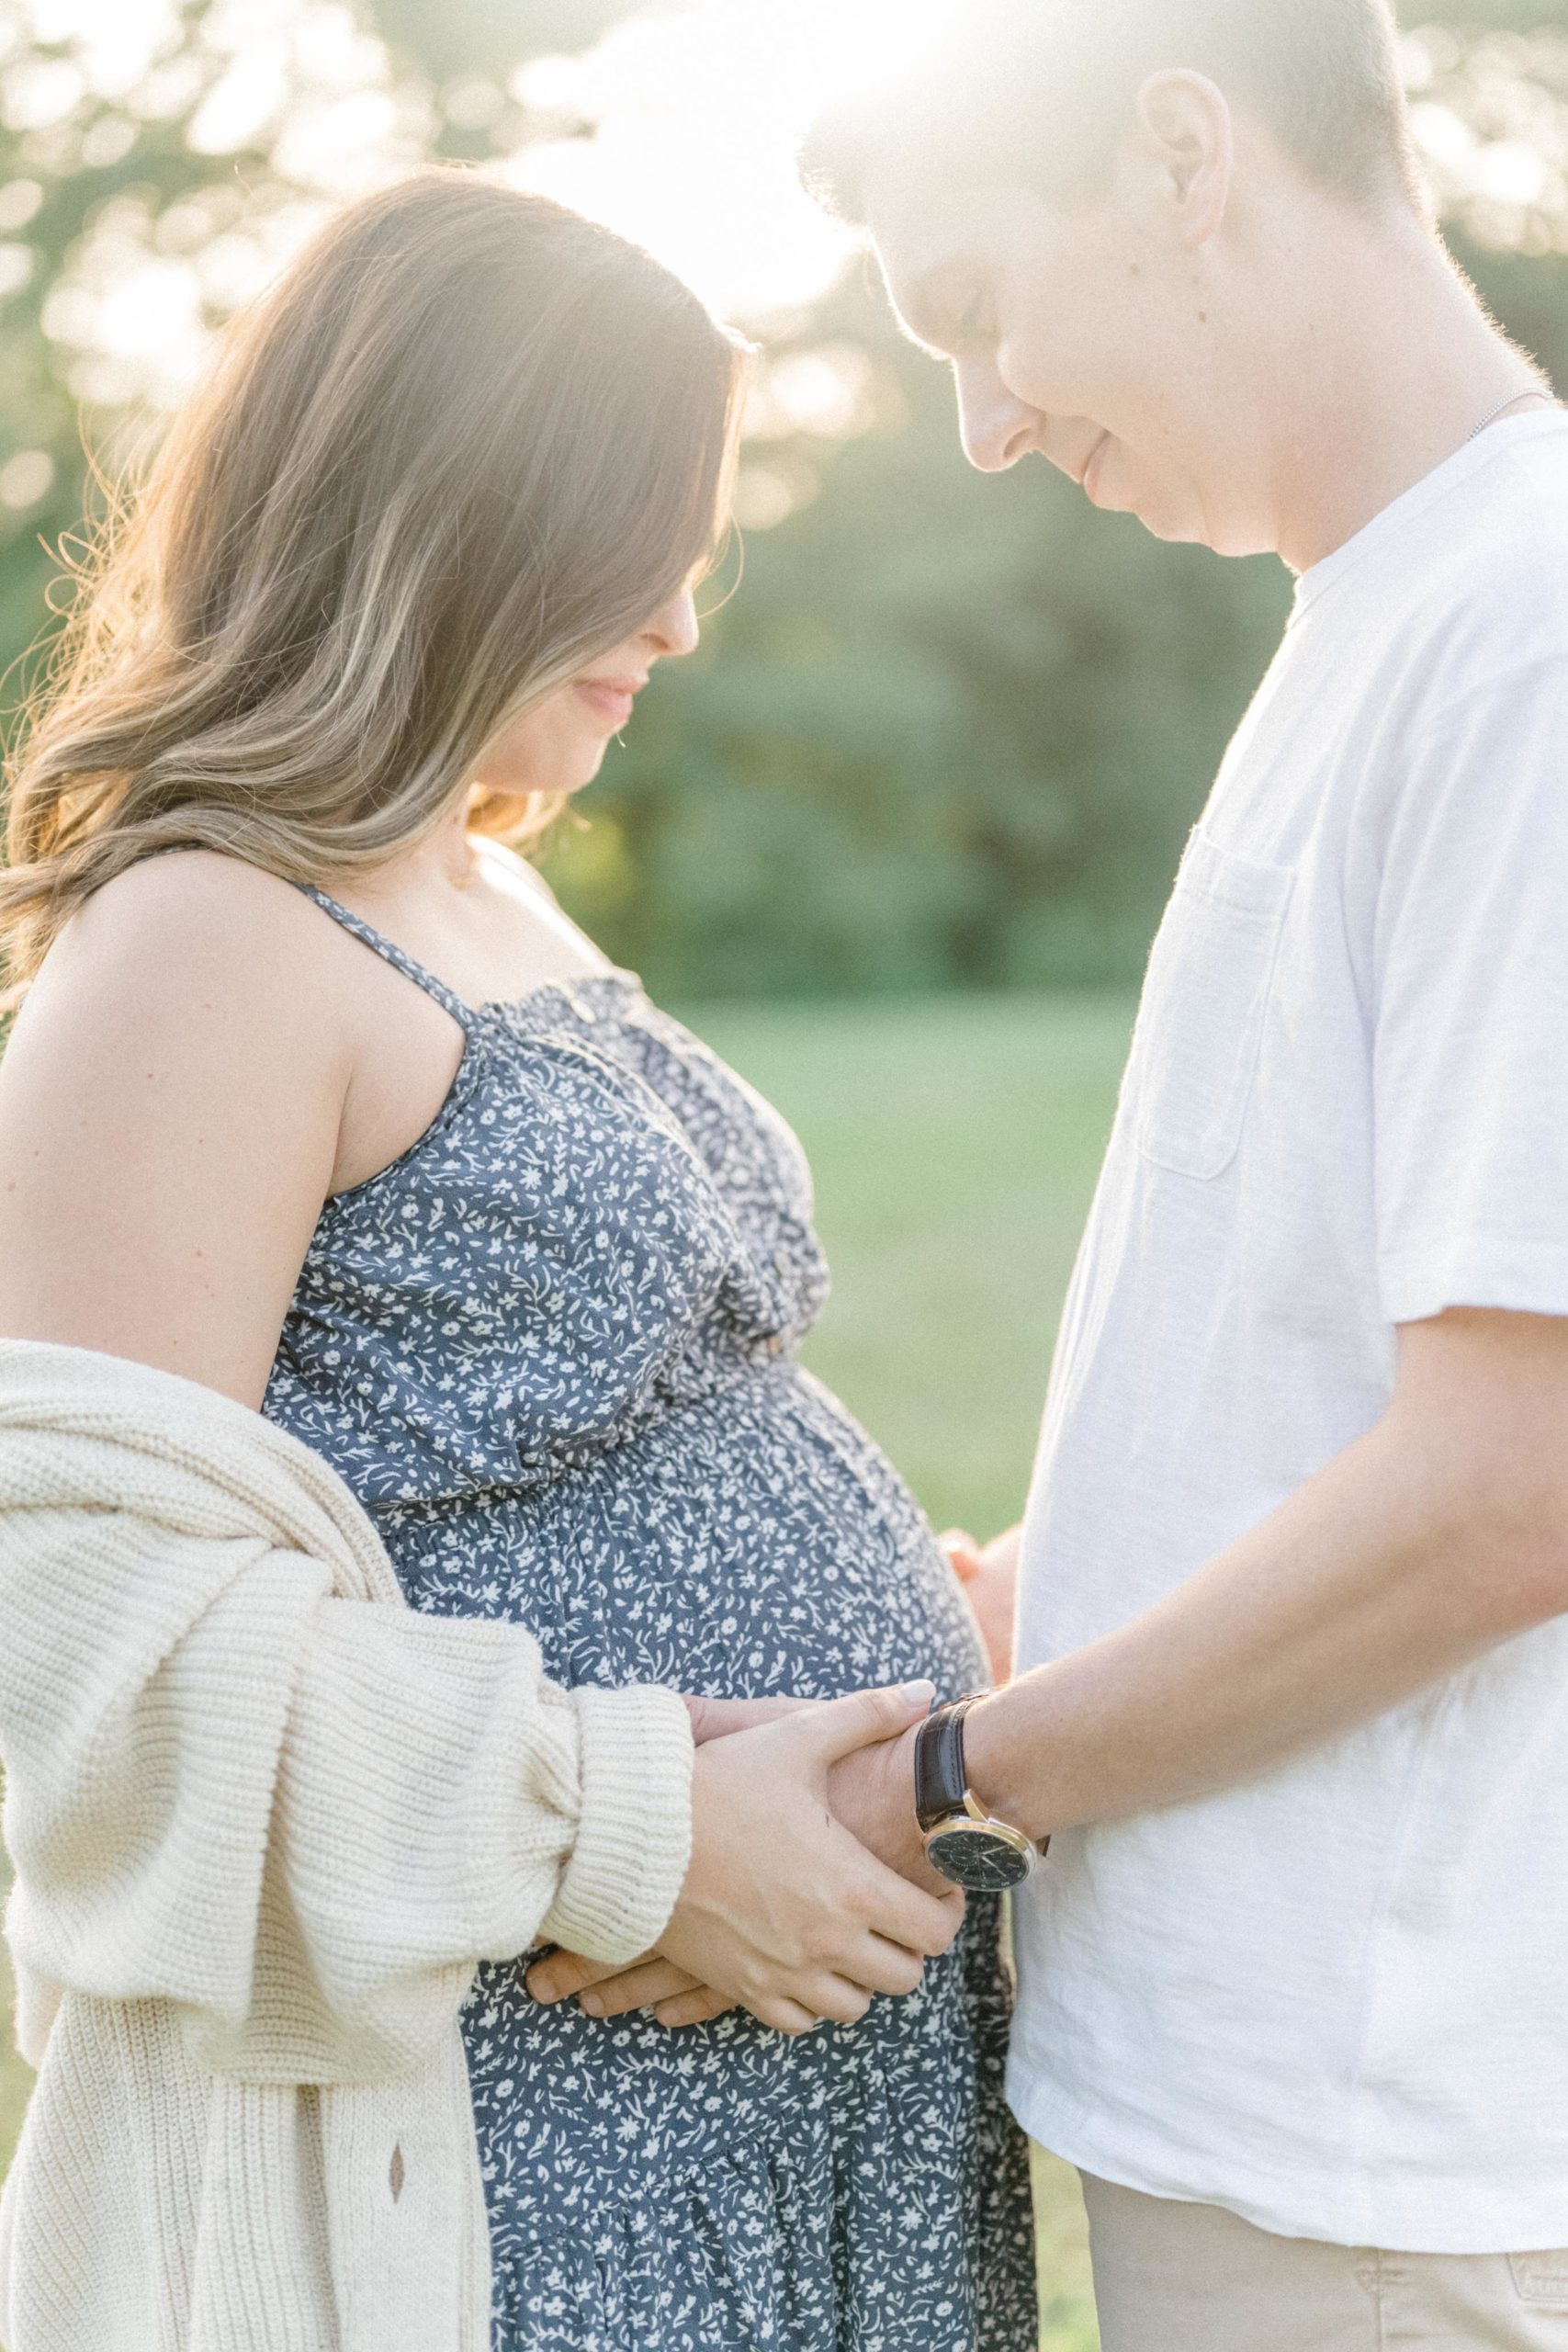 maternity session poses in an open field during sunset and golden hour.